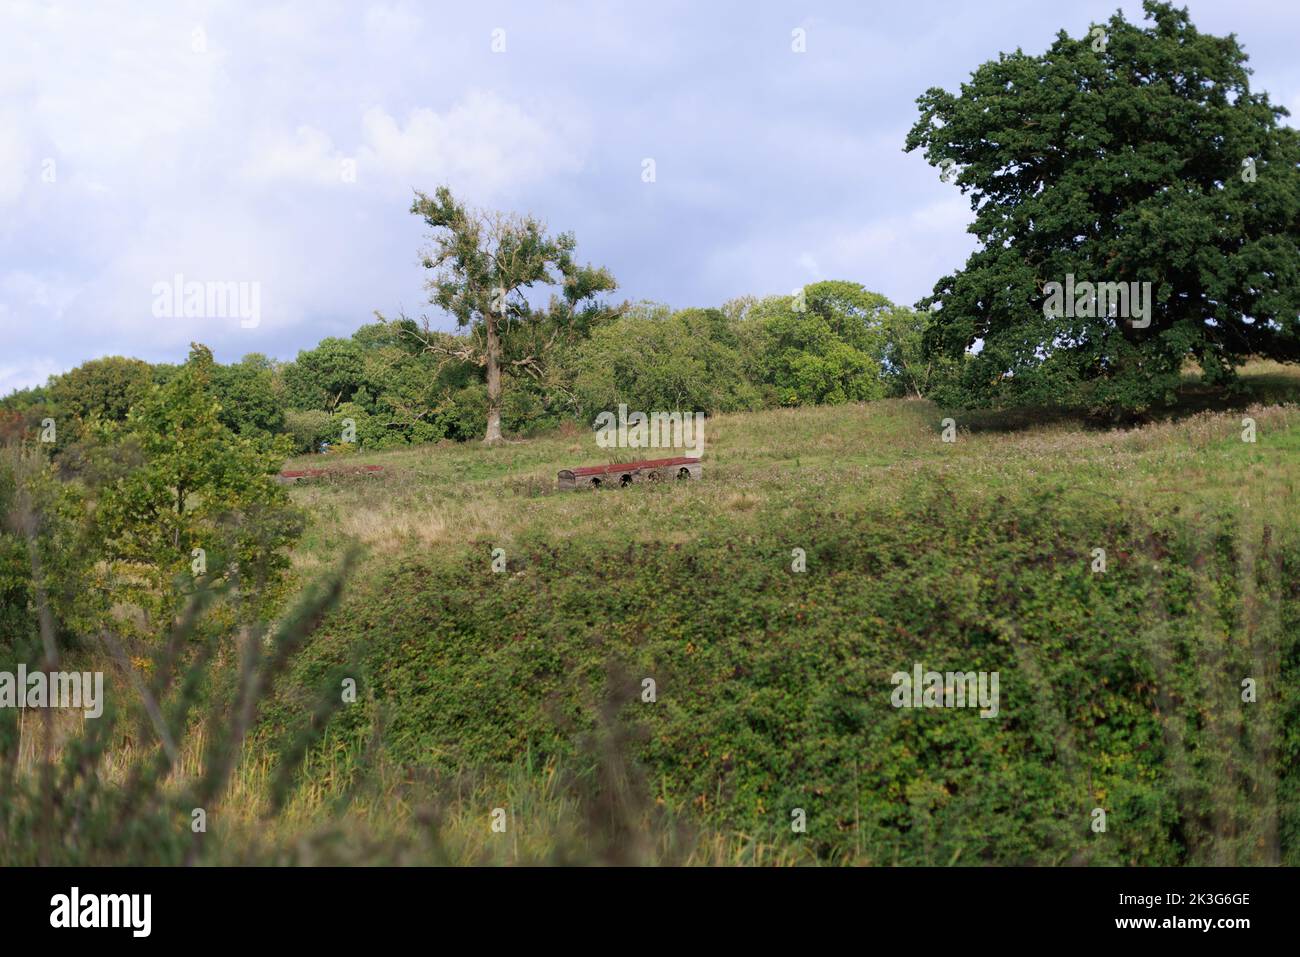 Small wooden coop or animal house in the British countryside Stock Photo